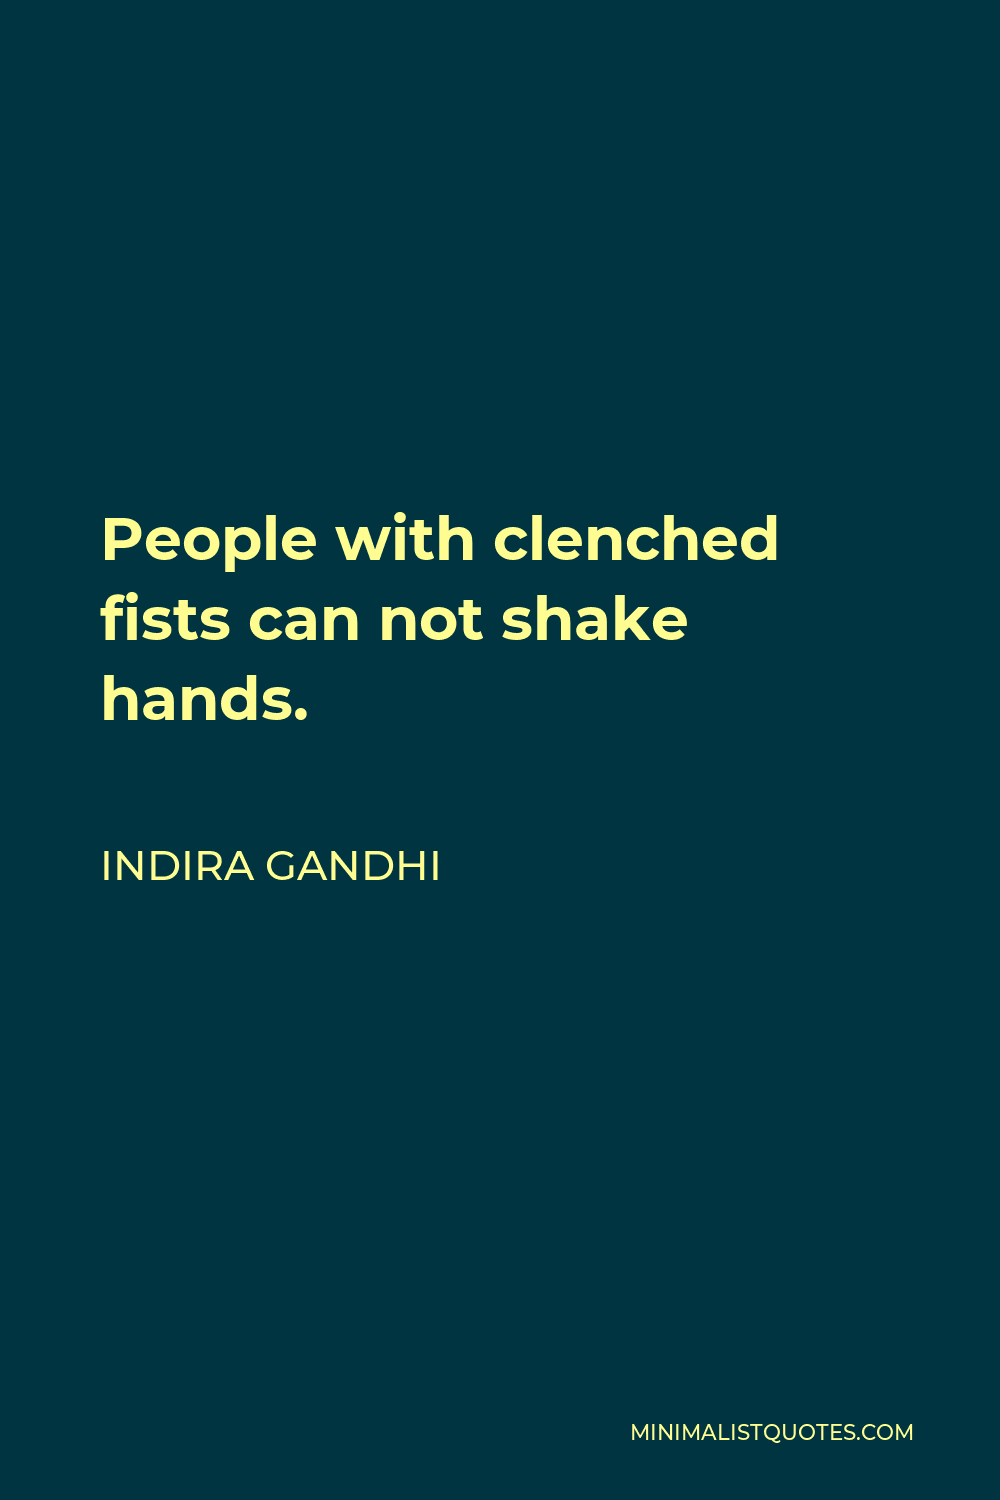 Indira Gandhi Quote - People with clenched fists can not shake hands.